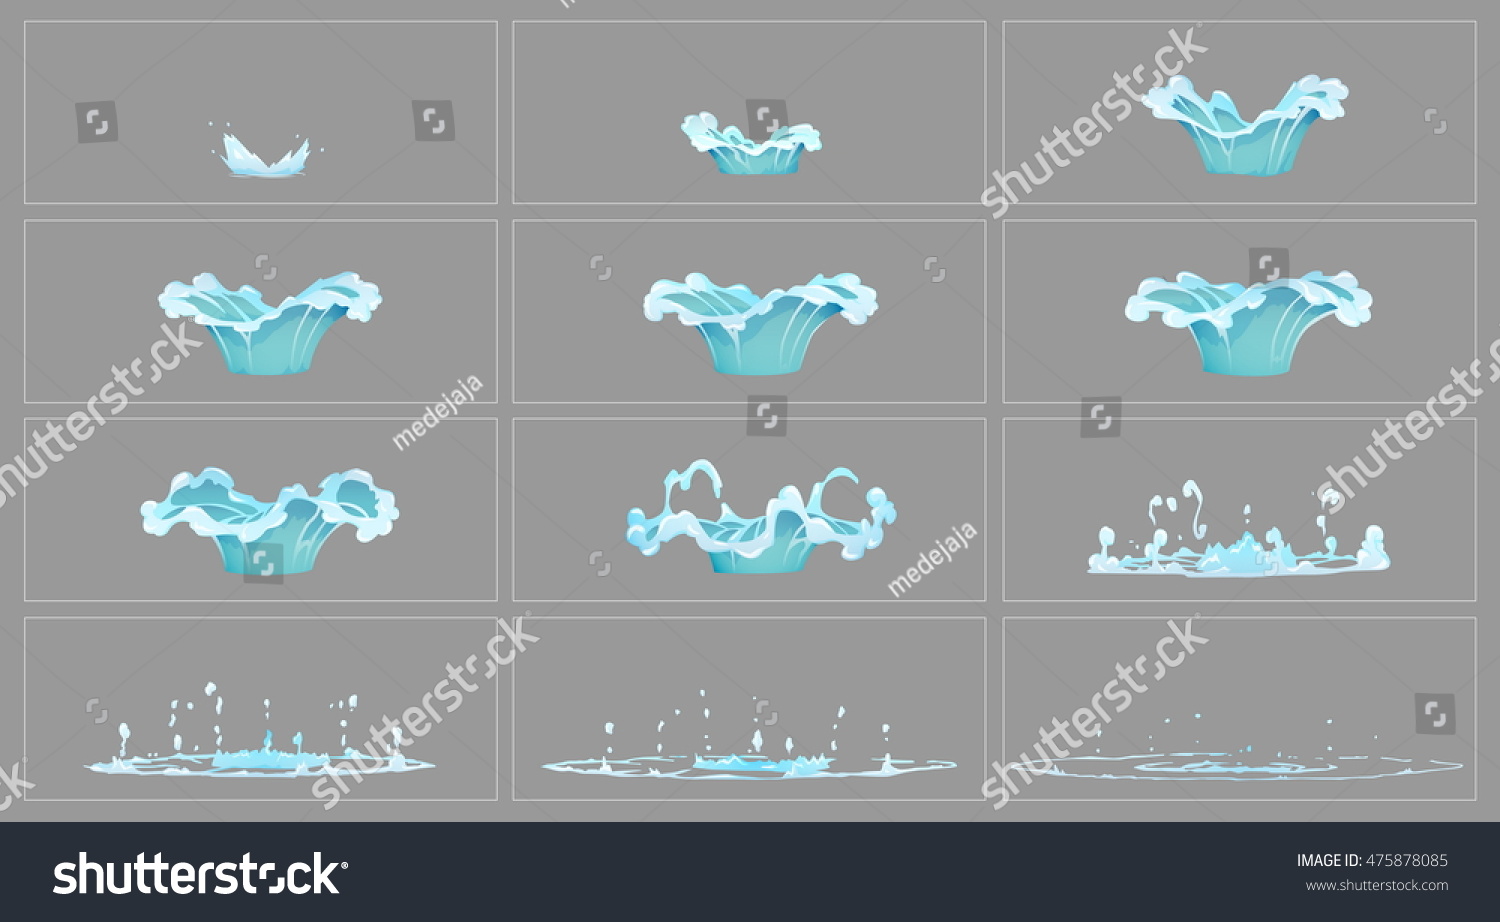 Water Animation Frames